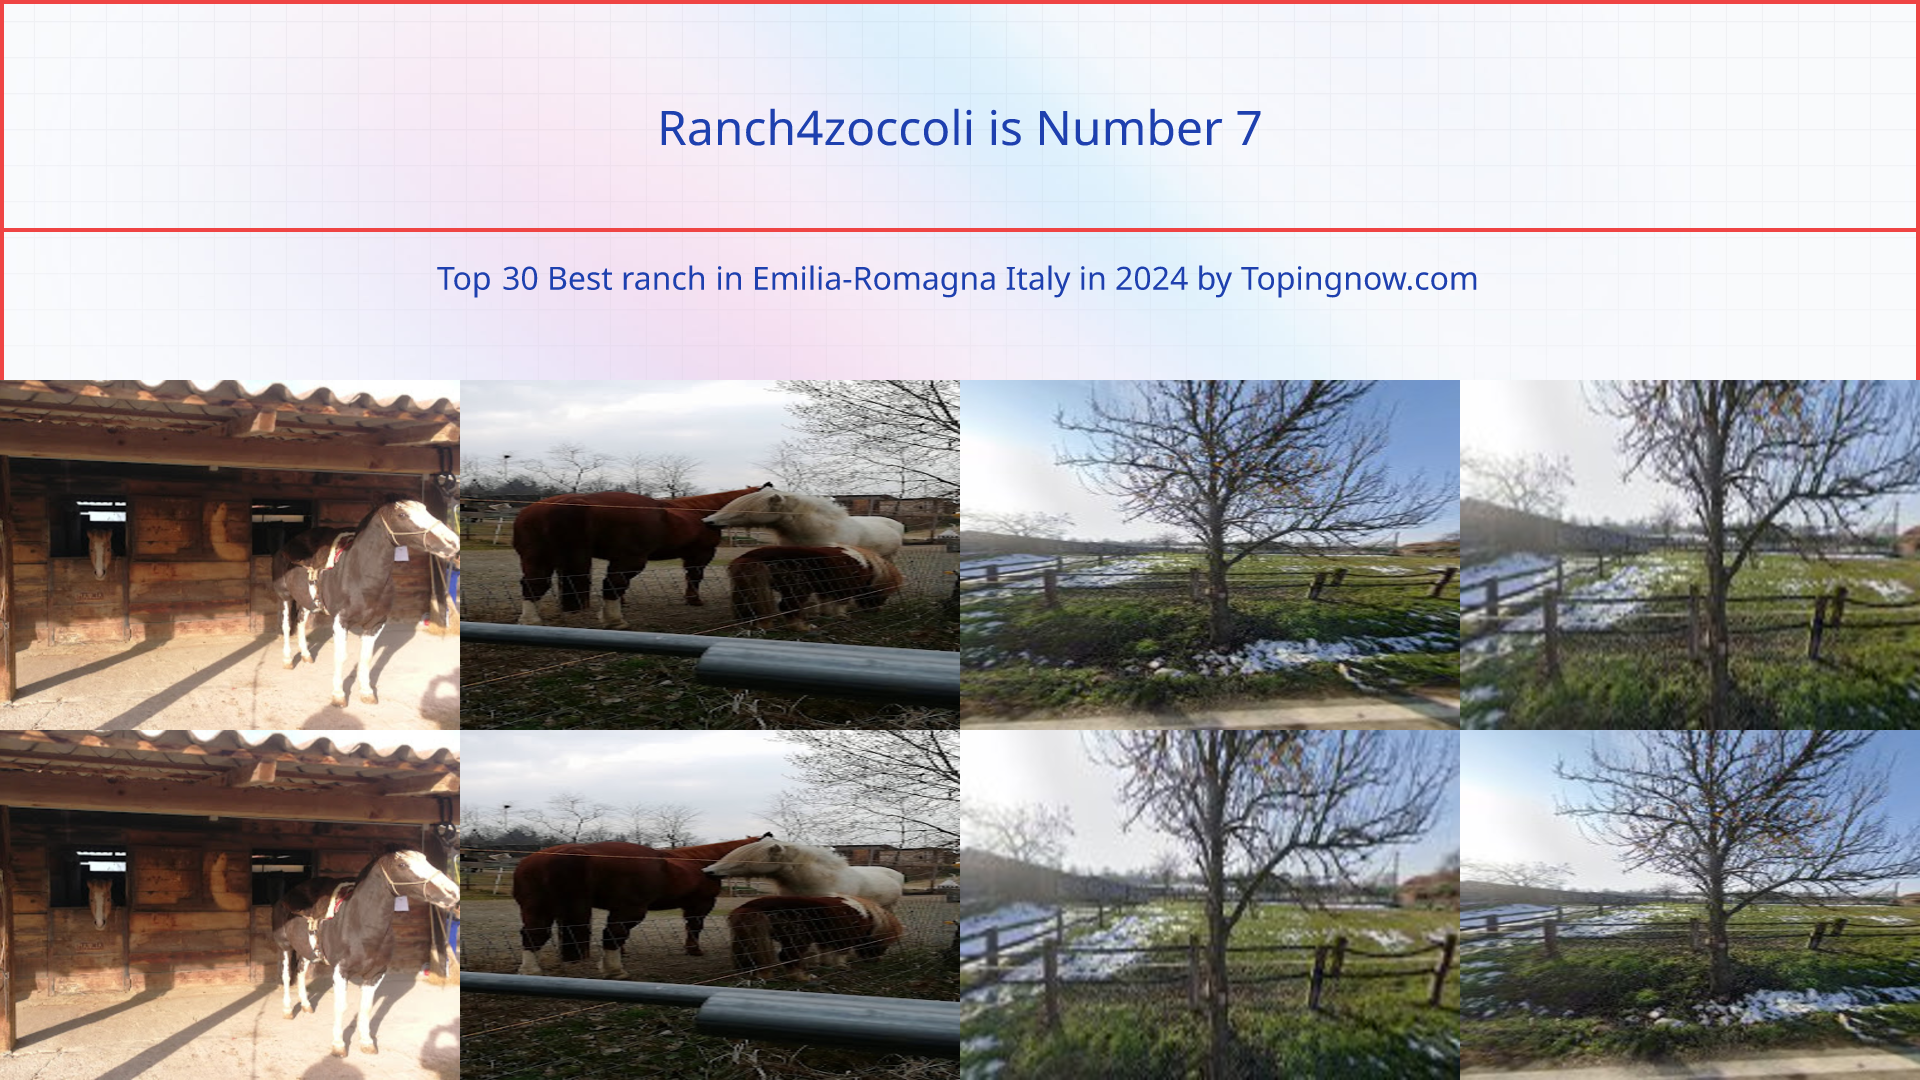 Ranch4zoccoli: Top 30 Best ranch in Emilia-Romagna Italy in 2024